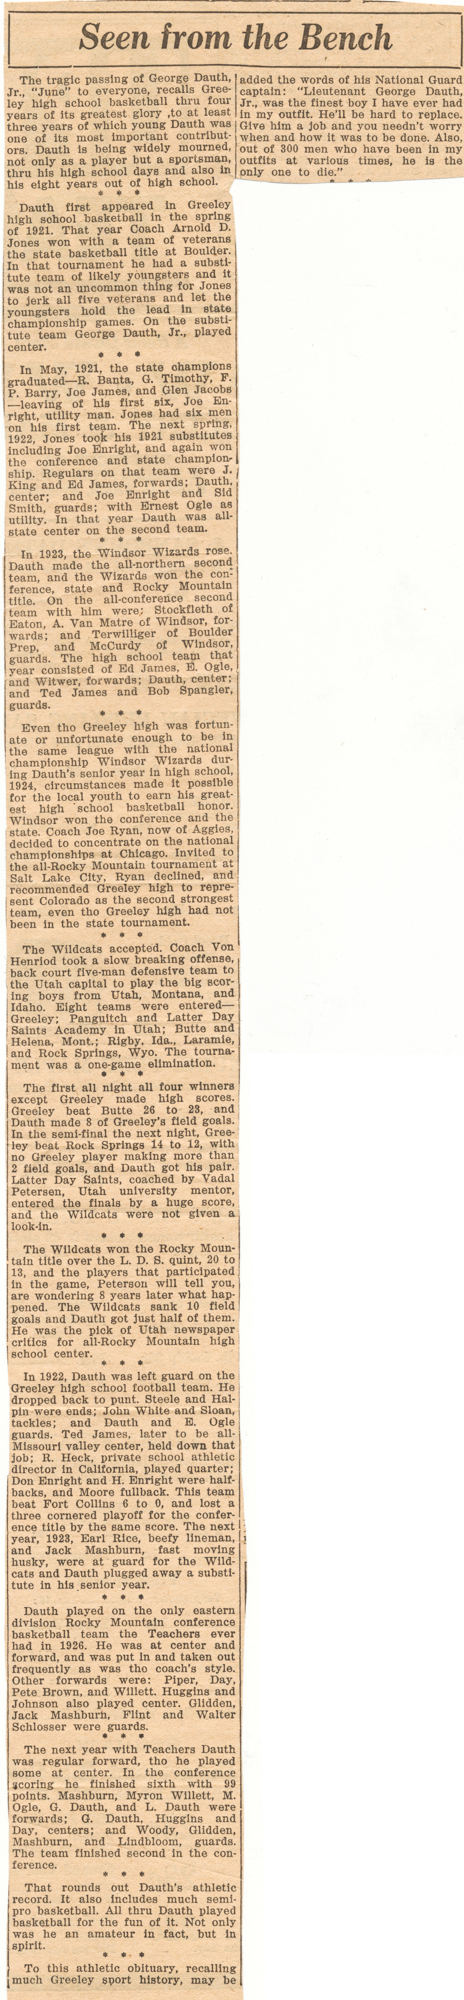 Dauth Family Archive - 1932-05-20 - Greeley Daily Tribune - June Dauth Sports Obituary